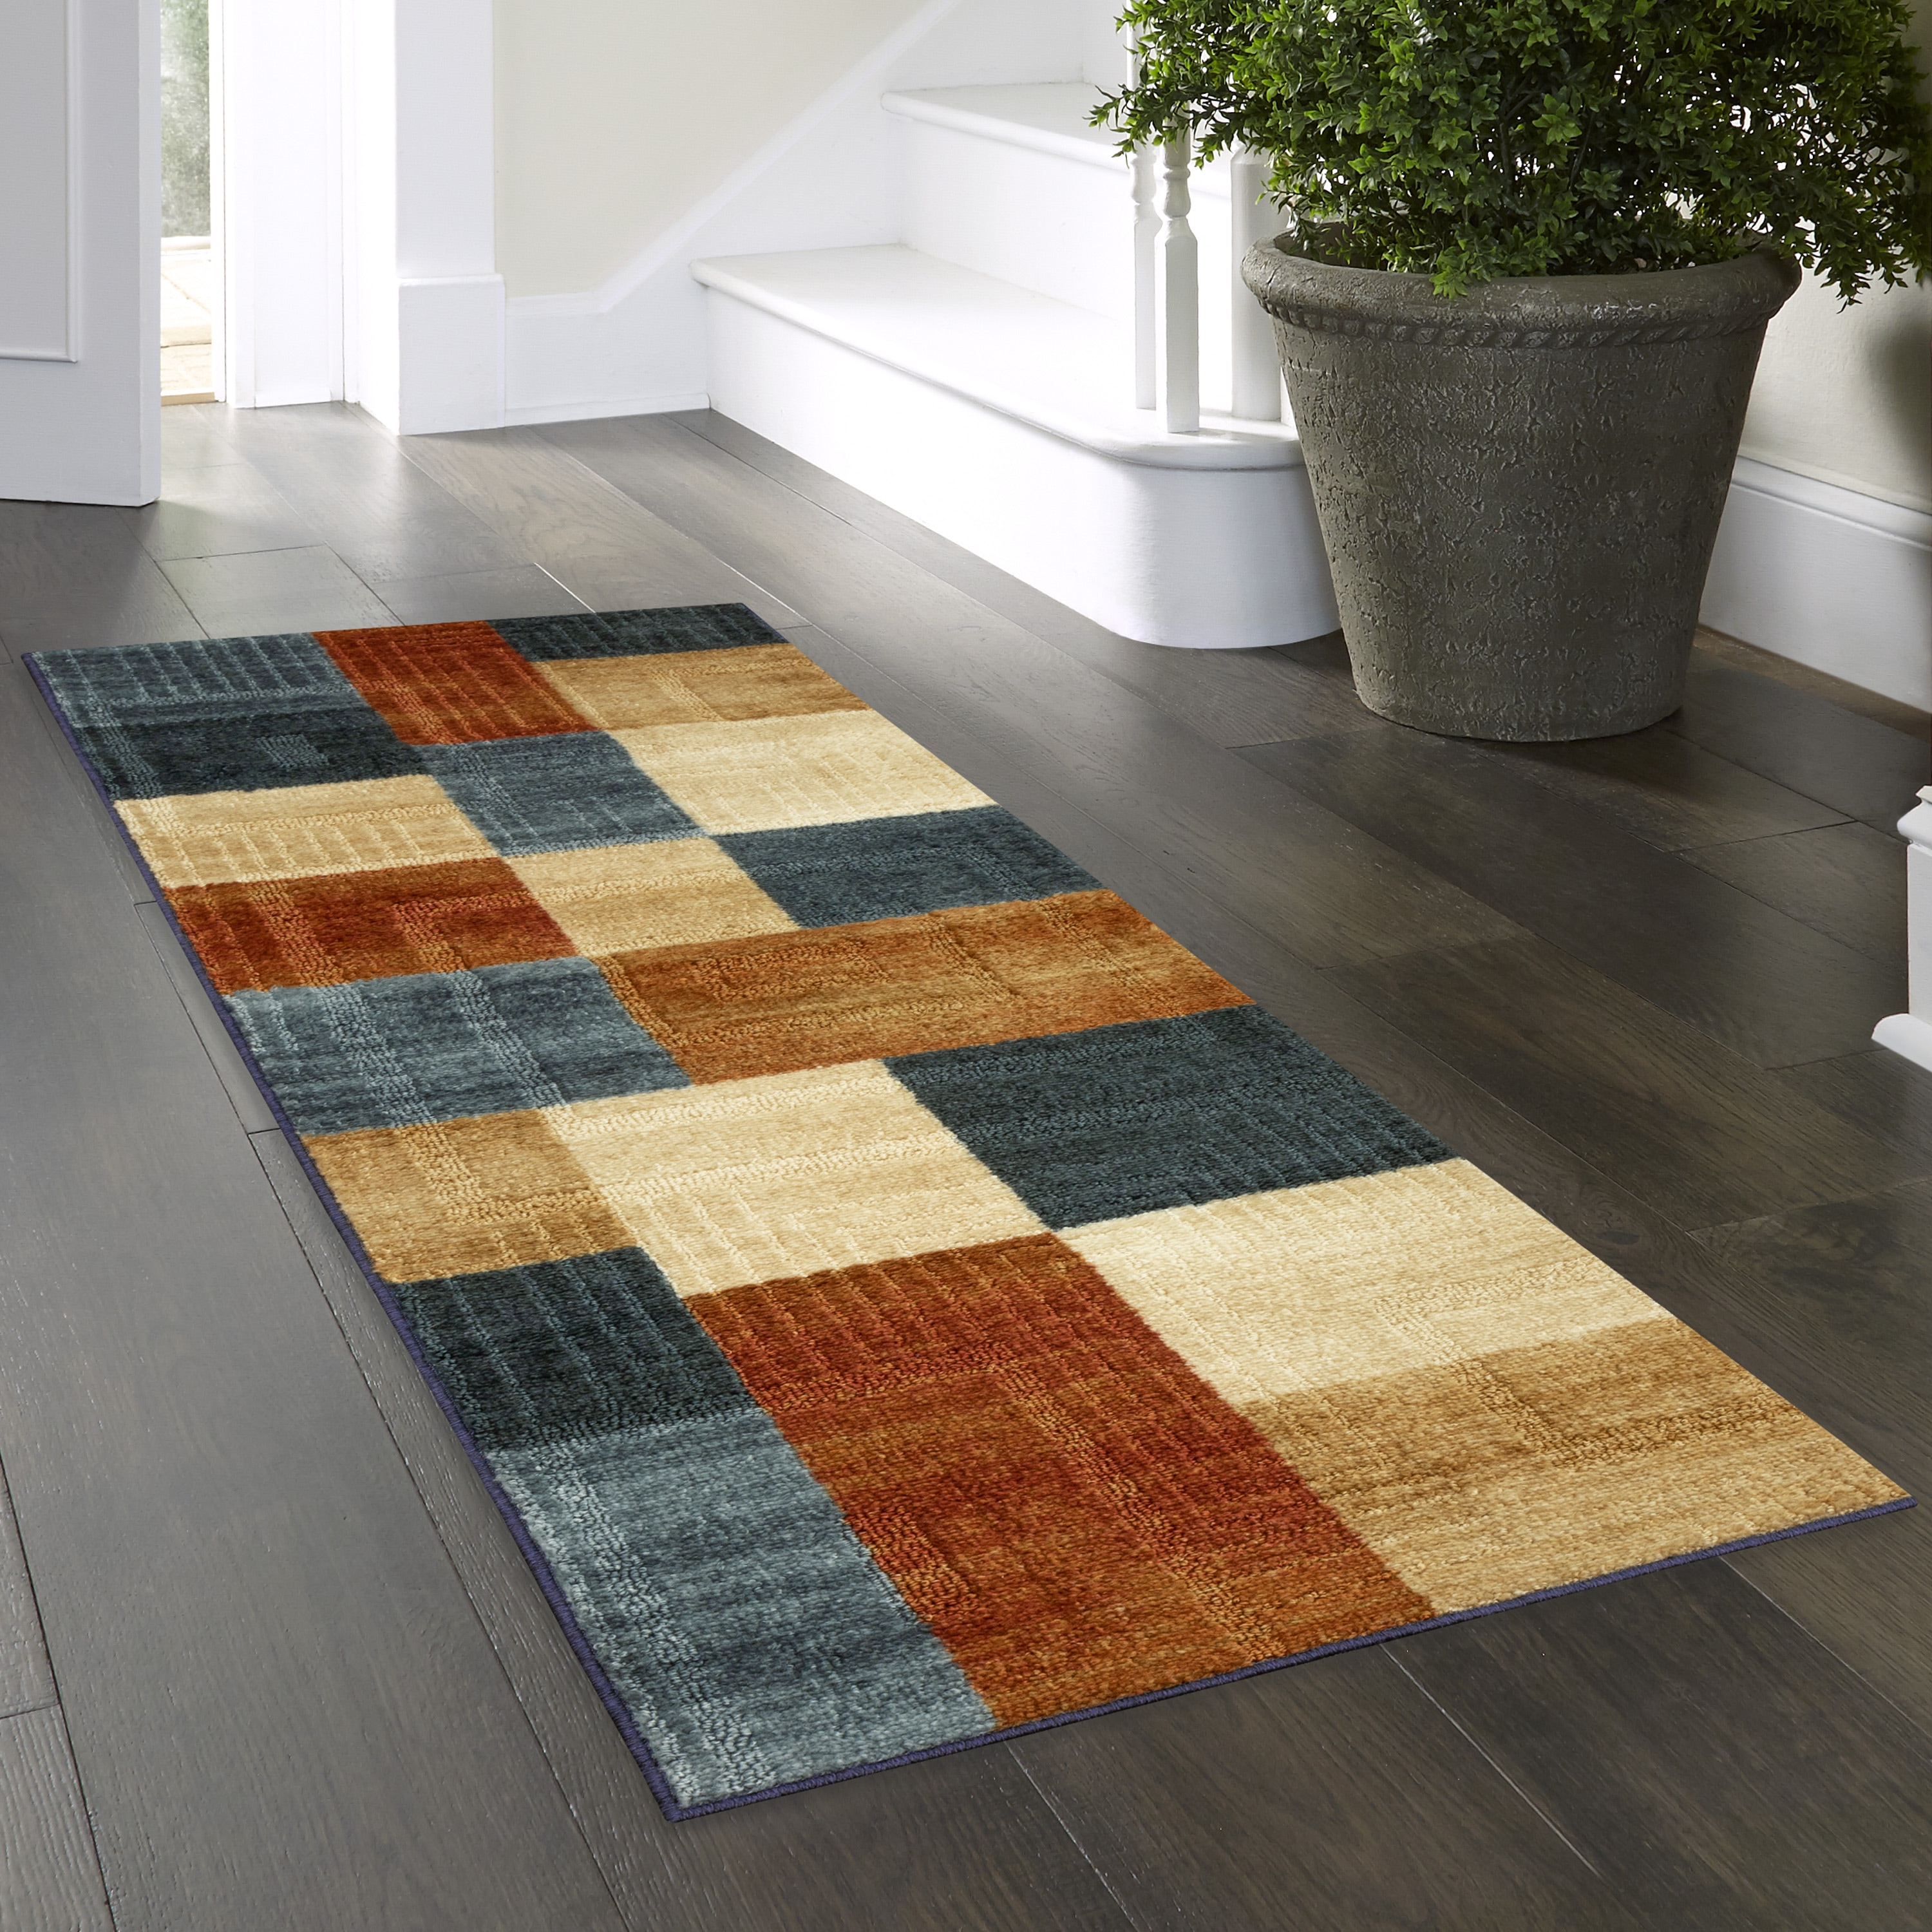 2 X 6 Indoor Geometric Mid-century Modern Machine Washable Runner Rug Polyester | - allen + roth with STAINMASTER B5174714